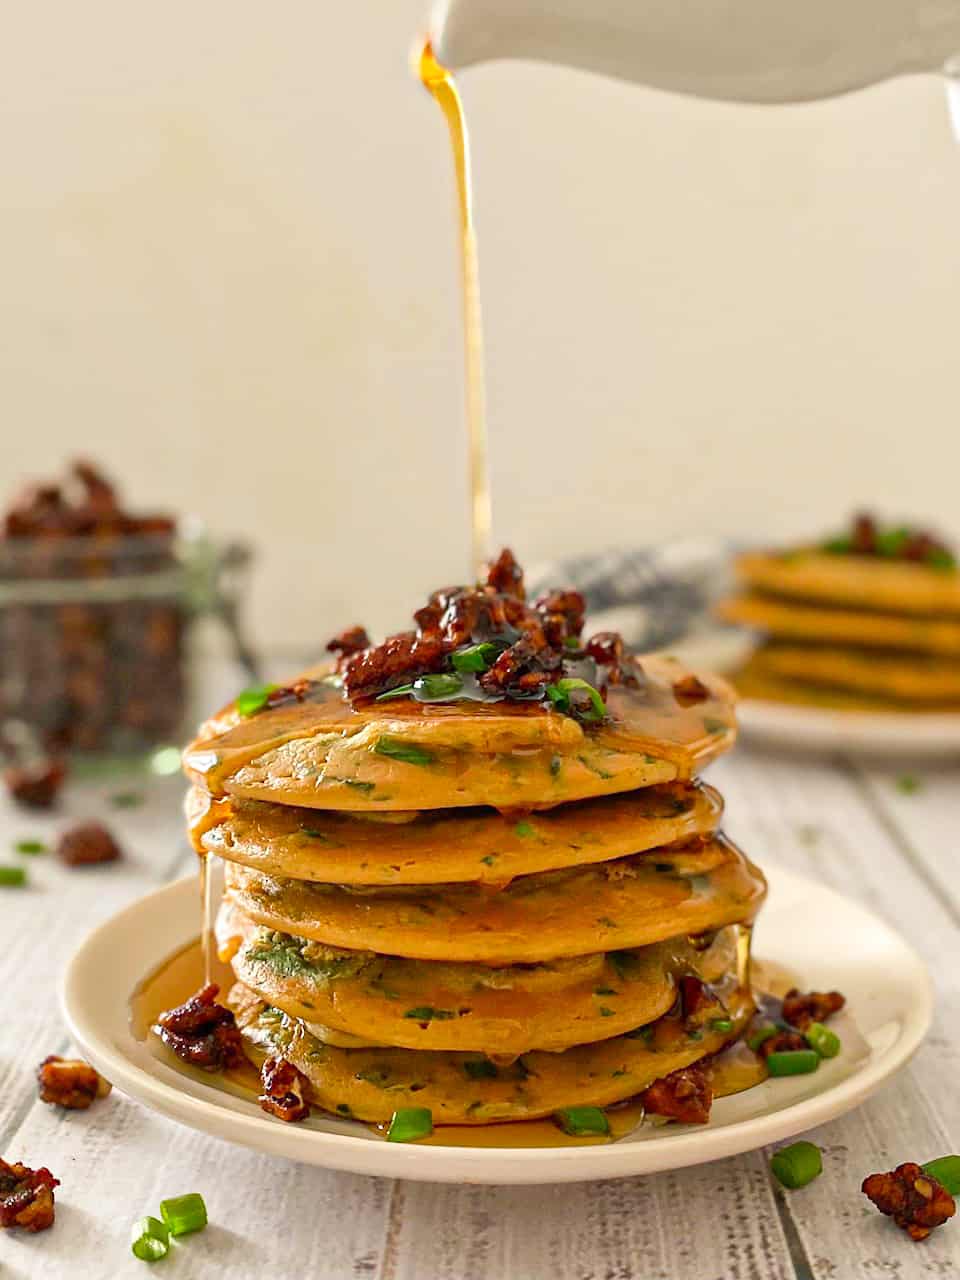 Savoury pancake stack with bacon and onion on top.